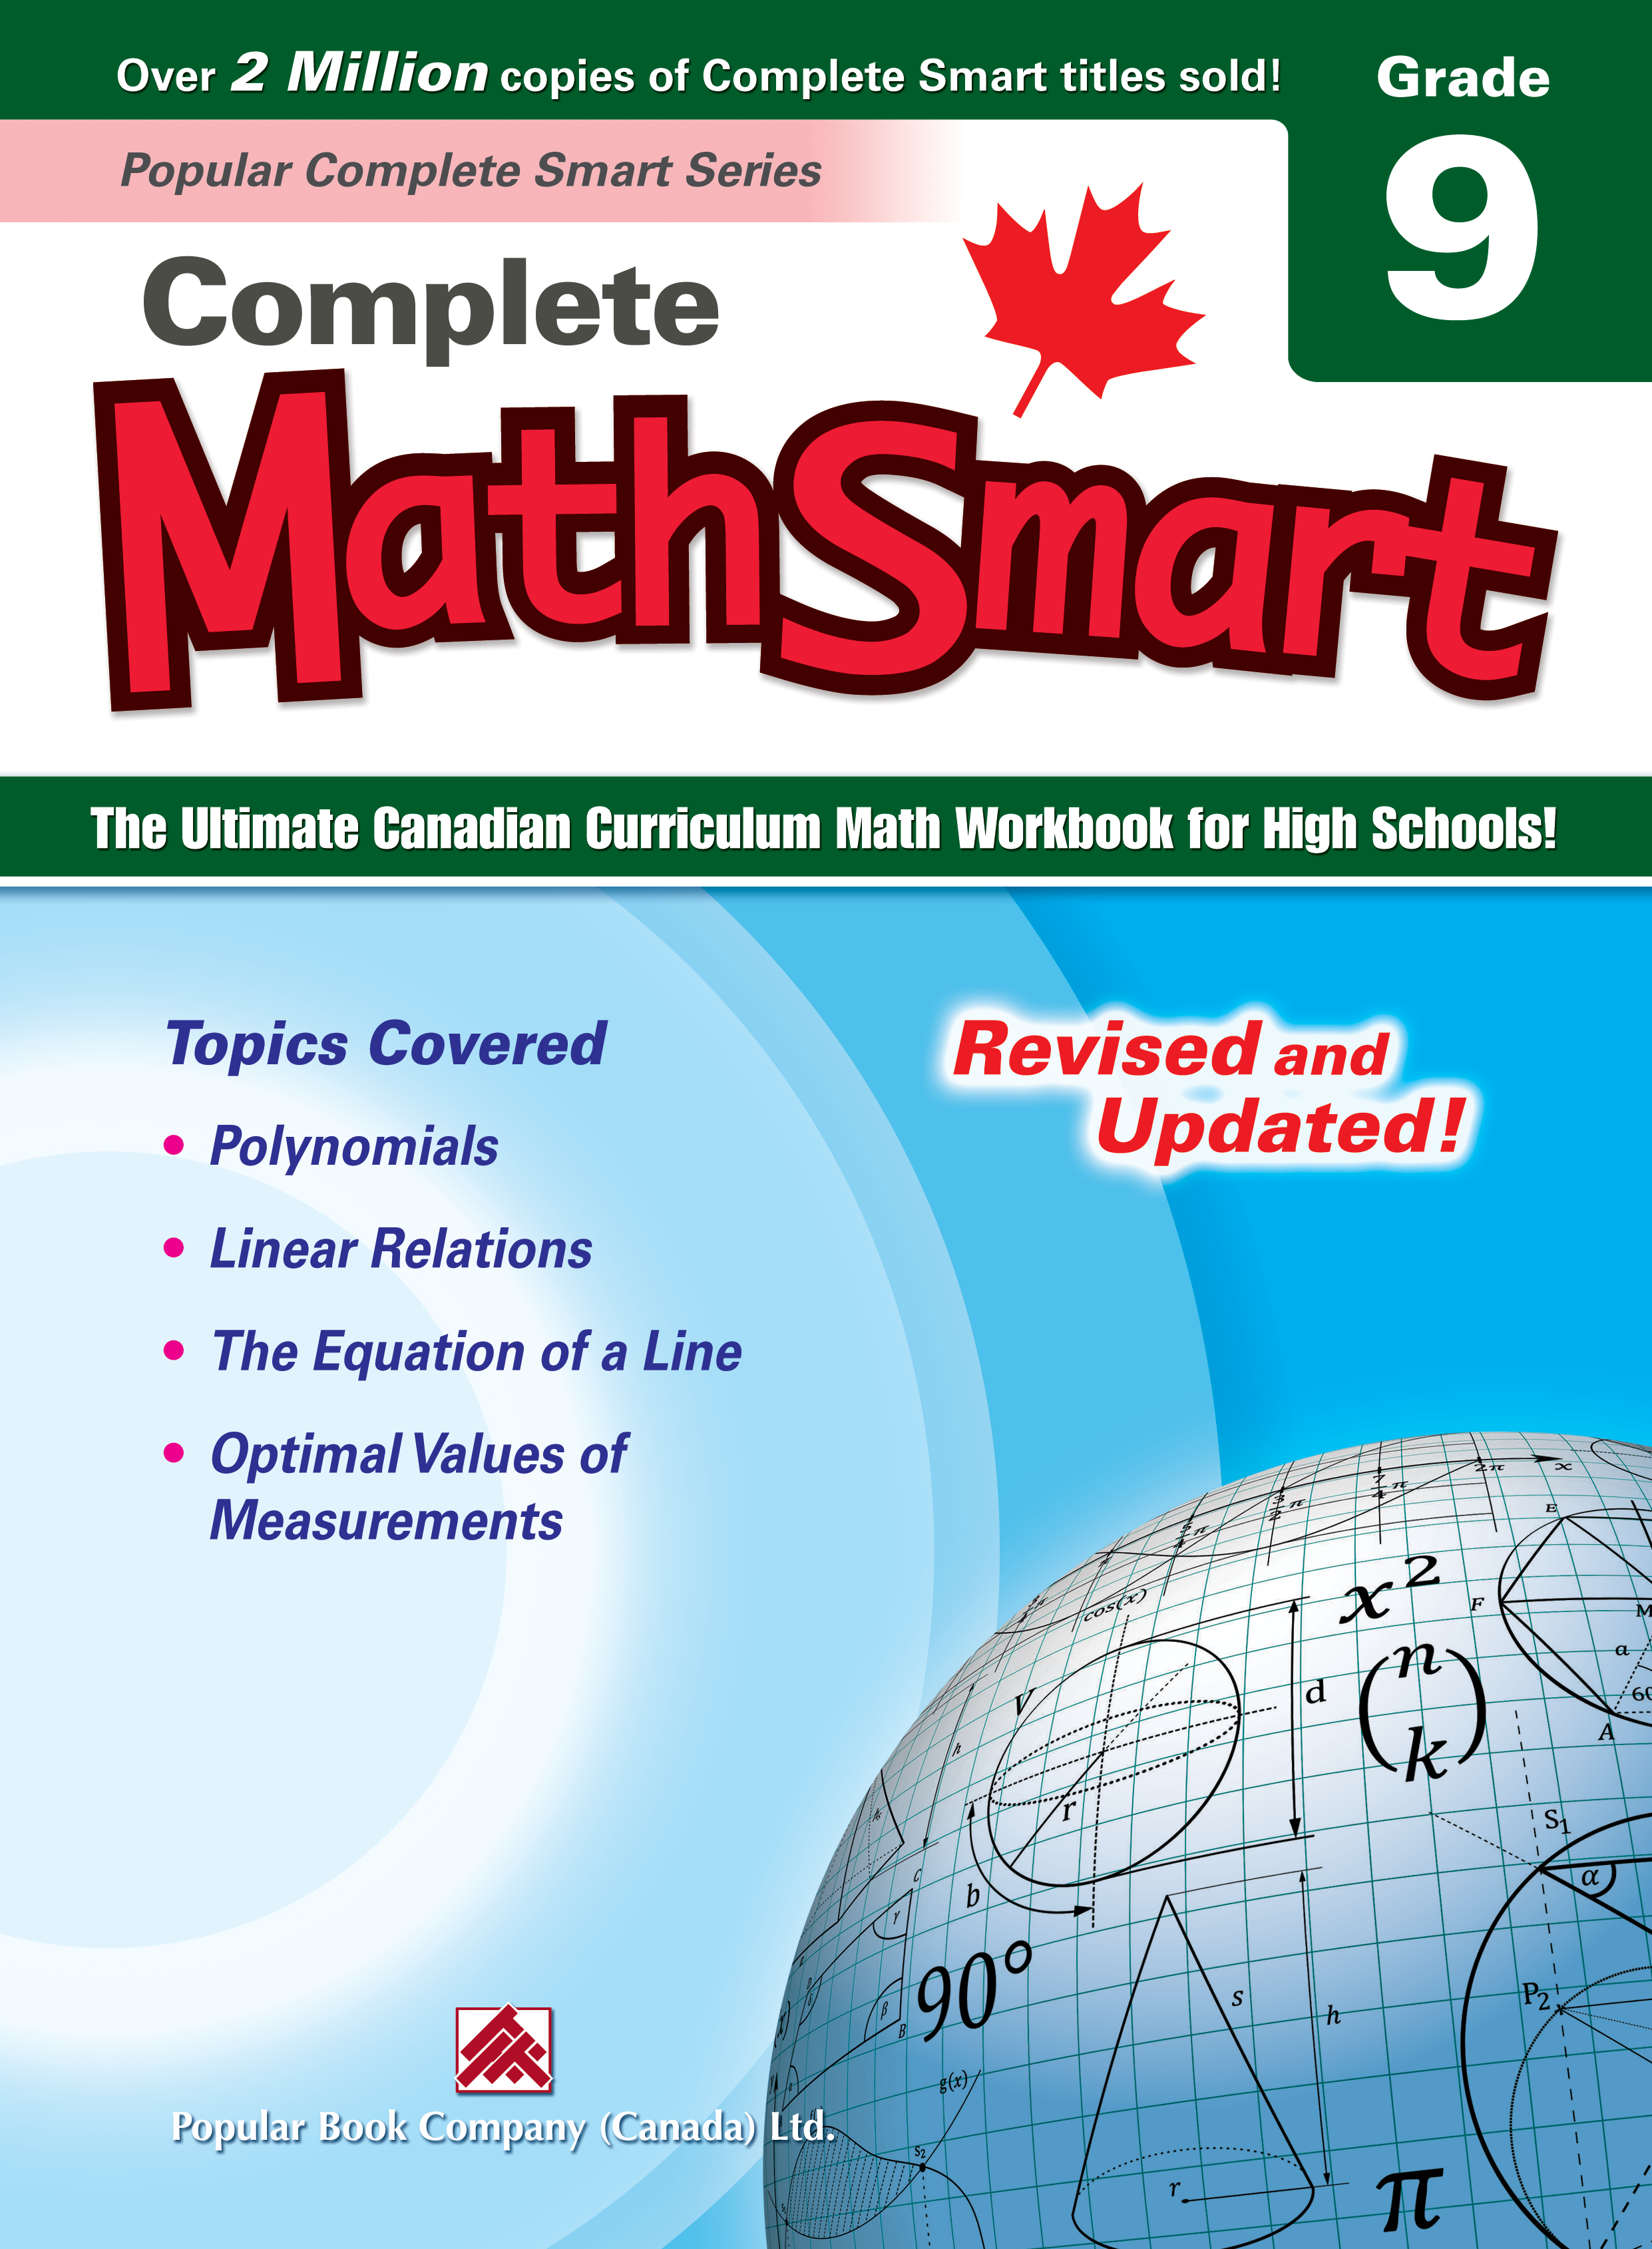 complete-mathsmart-grade-9-revised-and-updated-book-promotion-all